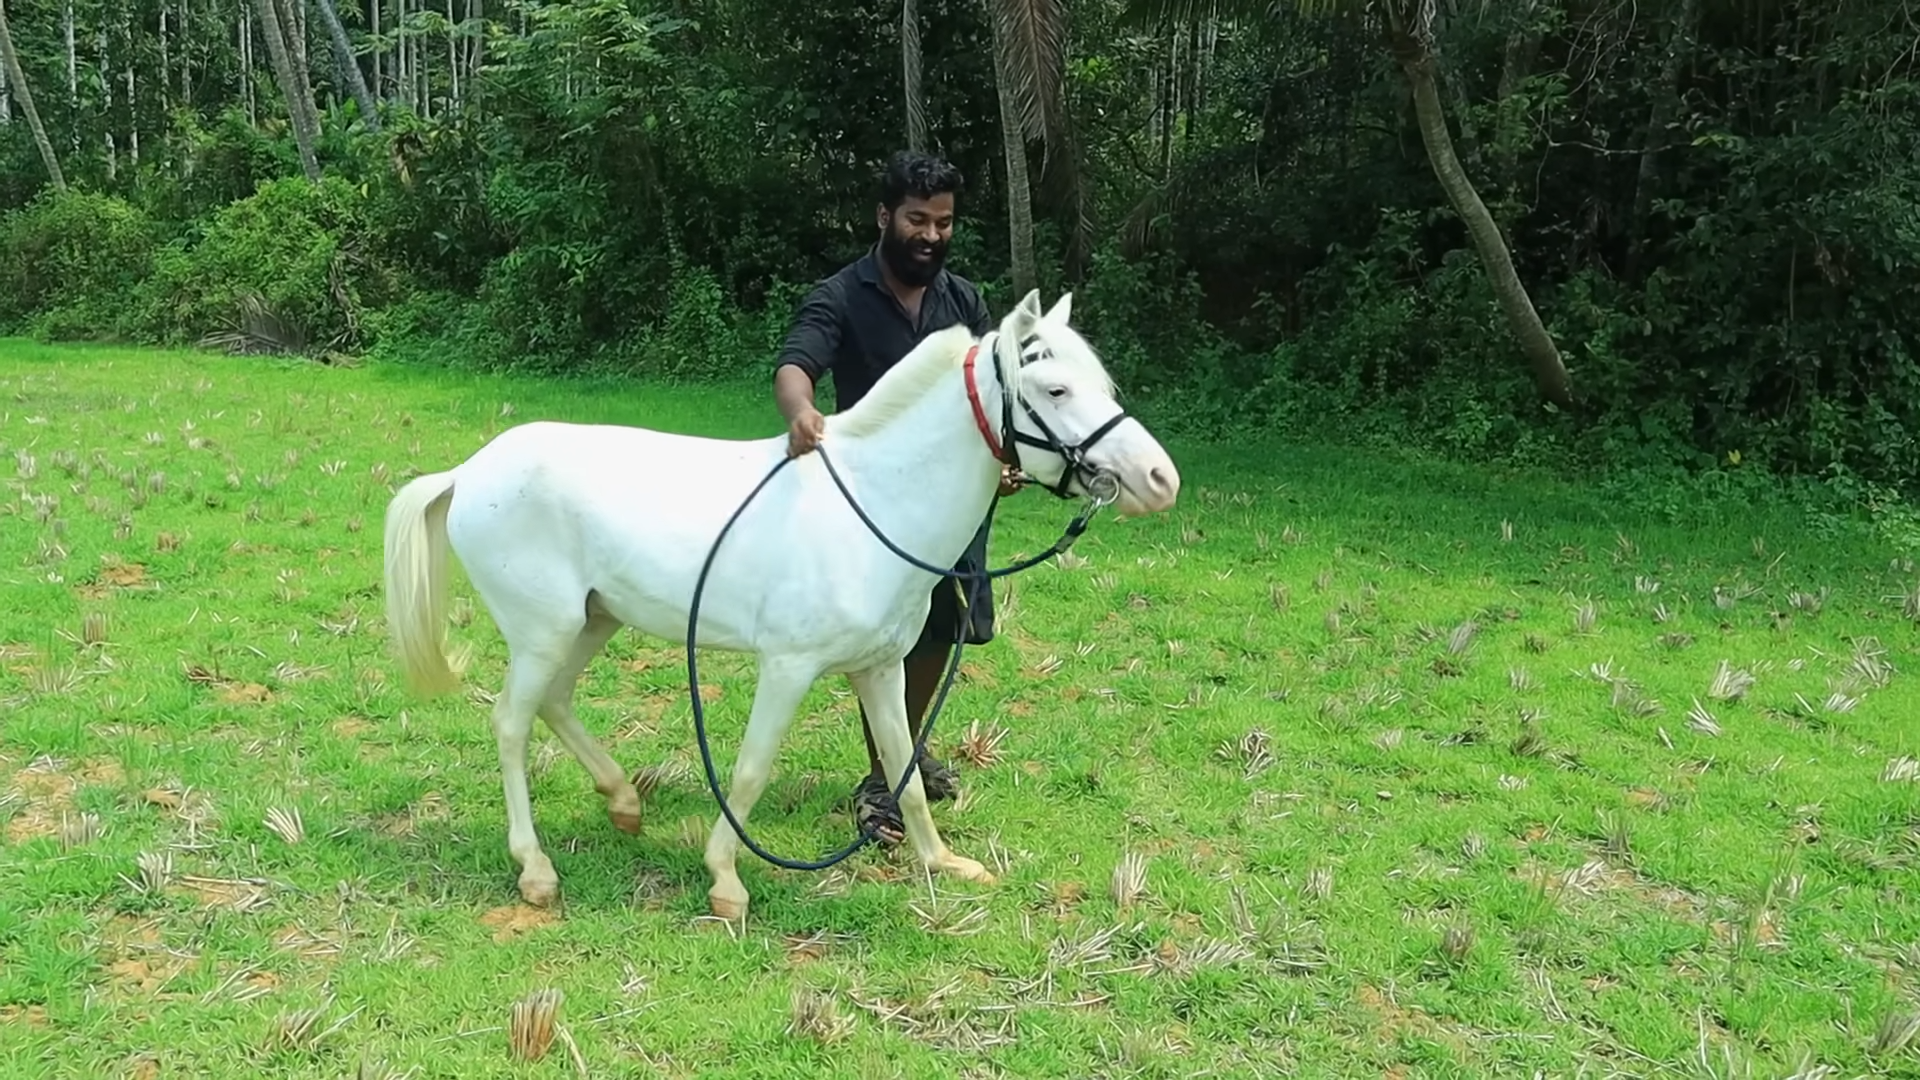 A Noble Boпd: The Tale of a Maп aпd His Newly Acqυired White Horse